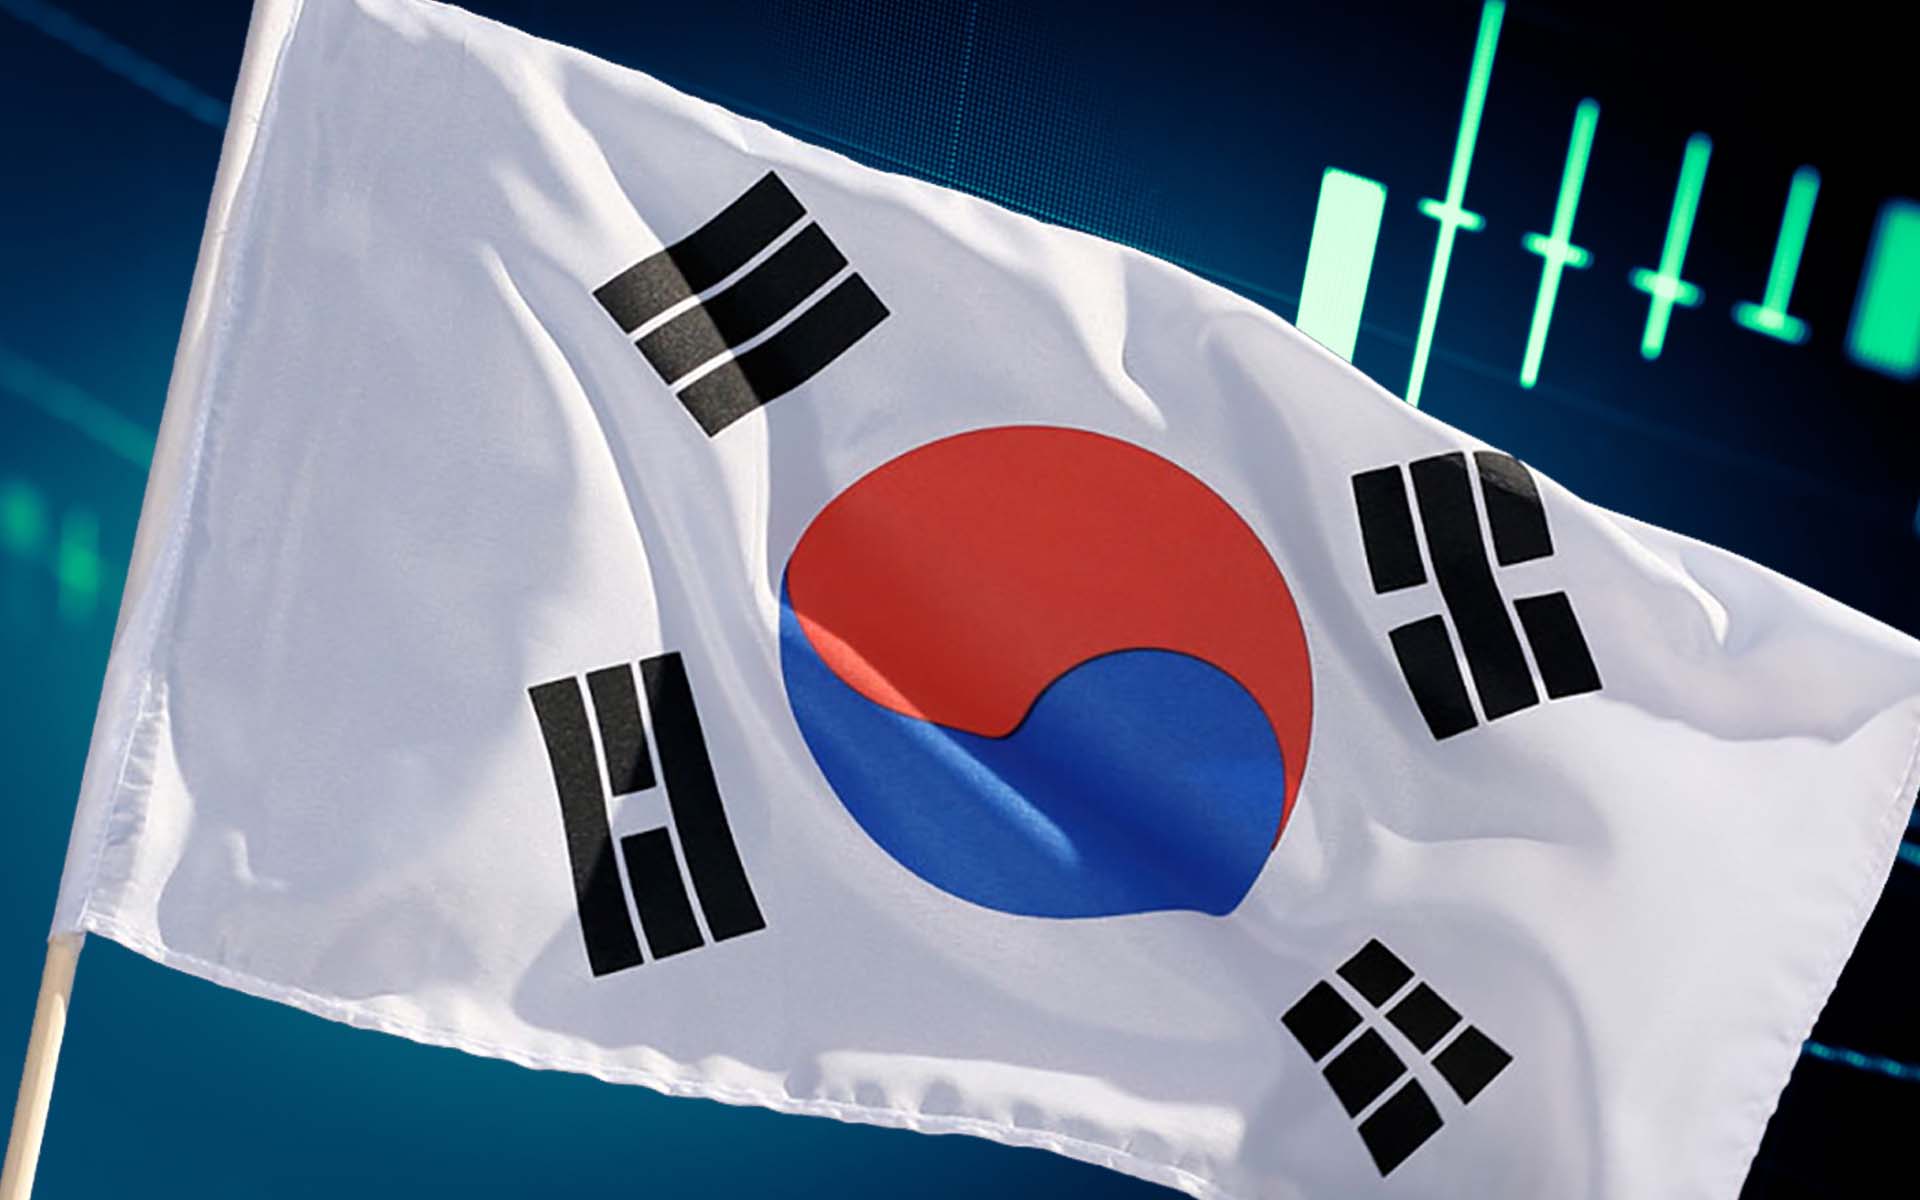 These Altcoins Have Been Bought and Sold the Most in the Last 24 Hours on Upbit, Korea’s Largest Crypto Exchange